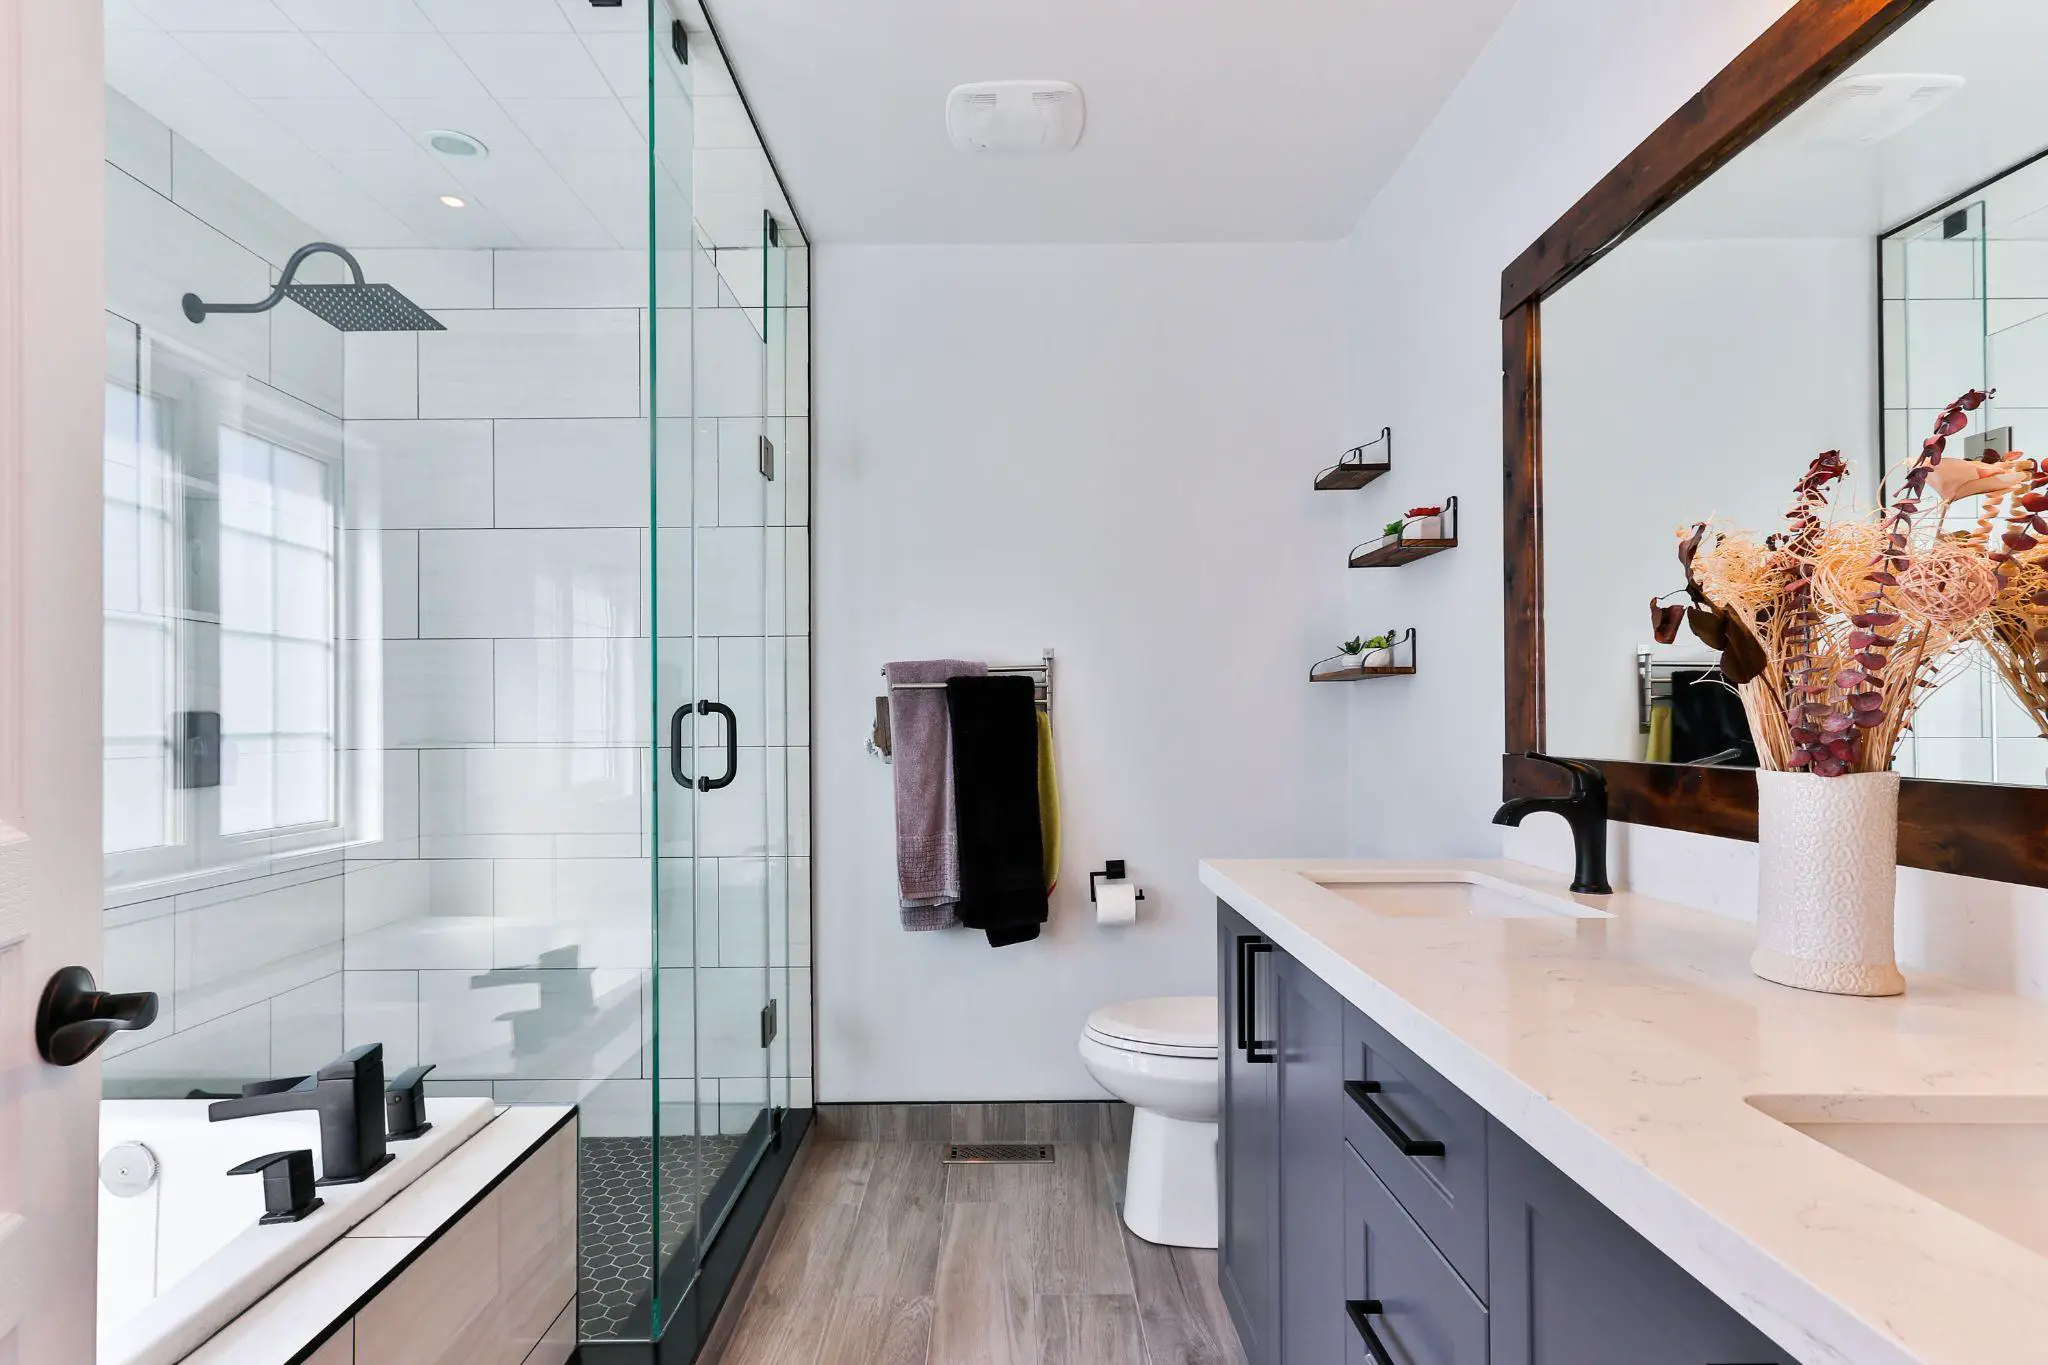 A modern bathroom with a glass shower and sink that enhances the value of your home.